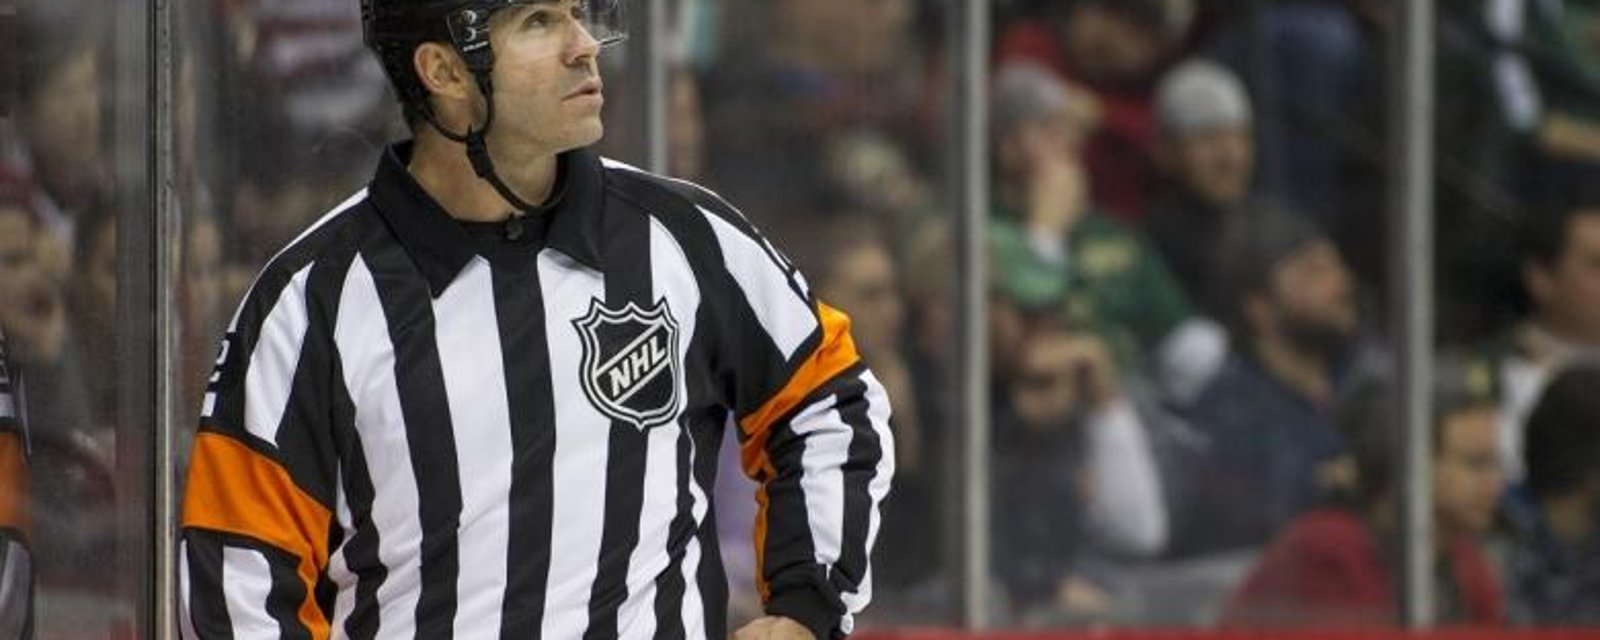 Breaking: NHL to make modifications to coaches' challenge in playoffs.